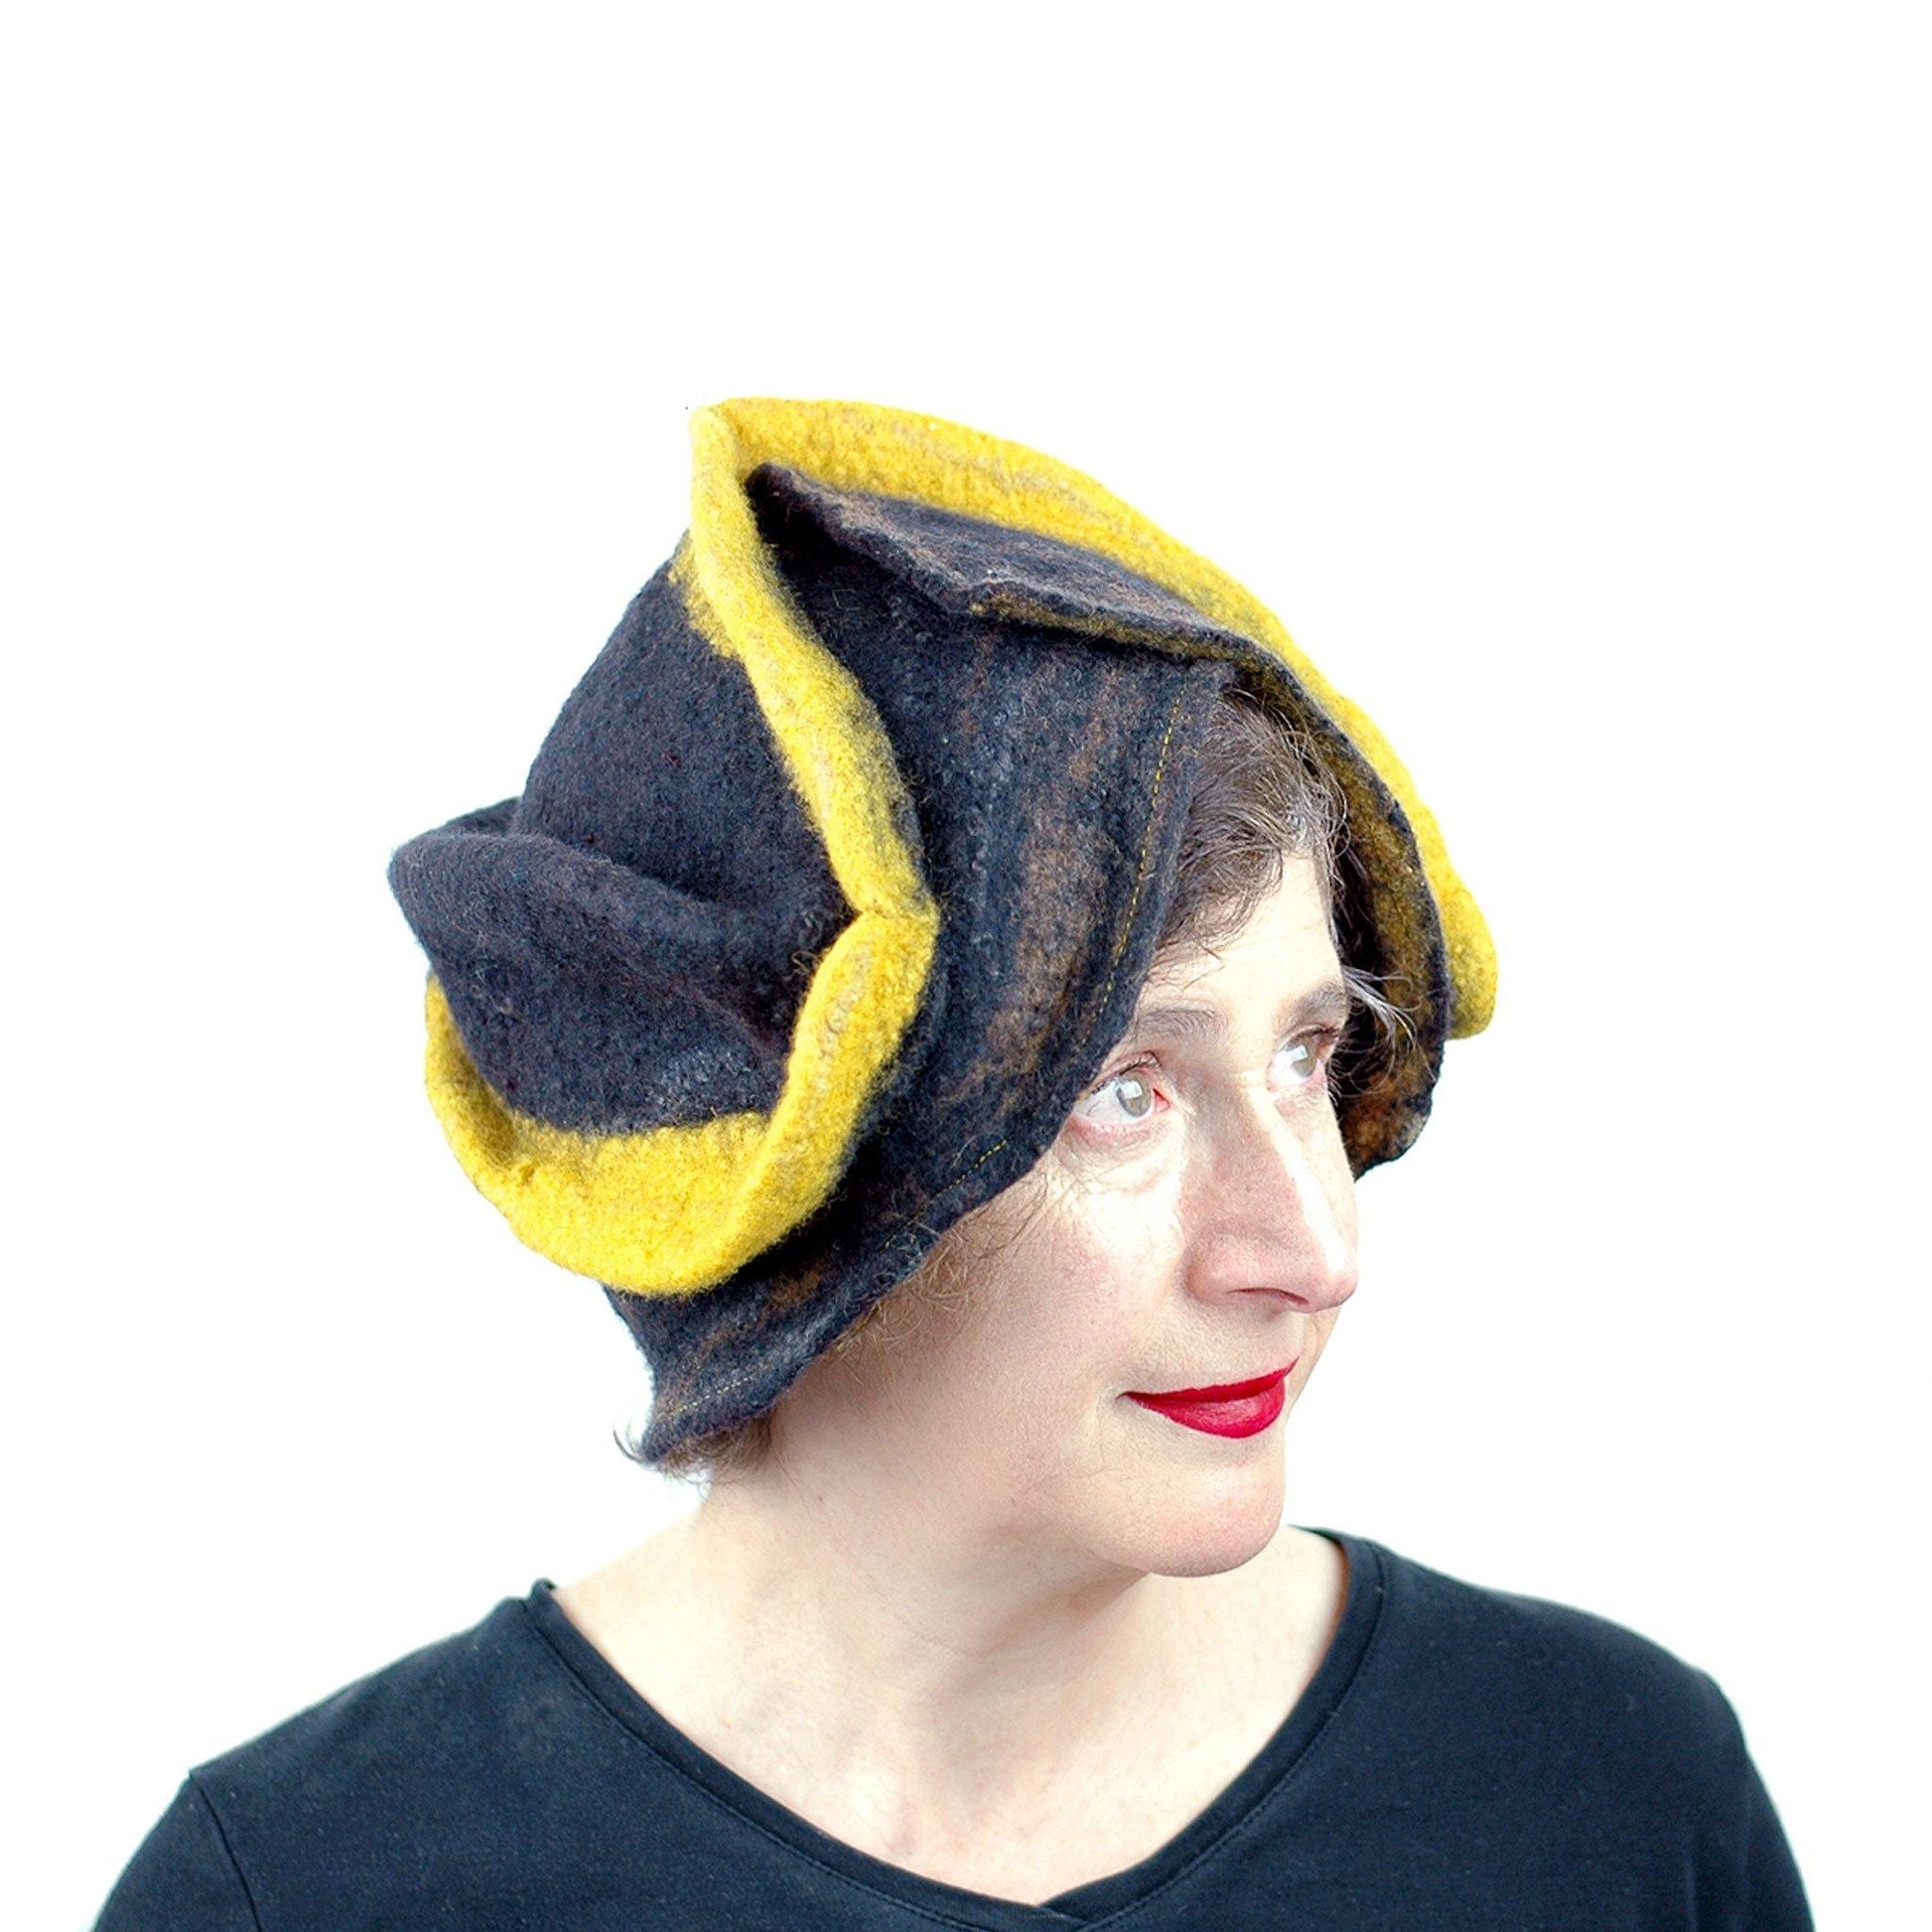 Black and Gold Wizard Hat for Pittsburgh or Hufflepuff Fans - three quarters view